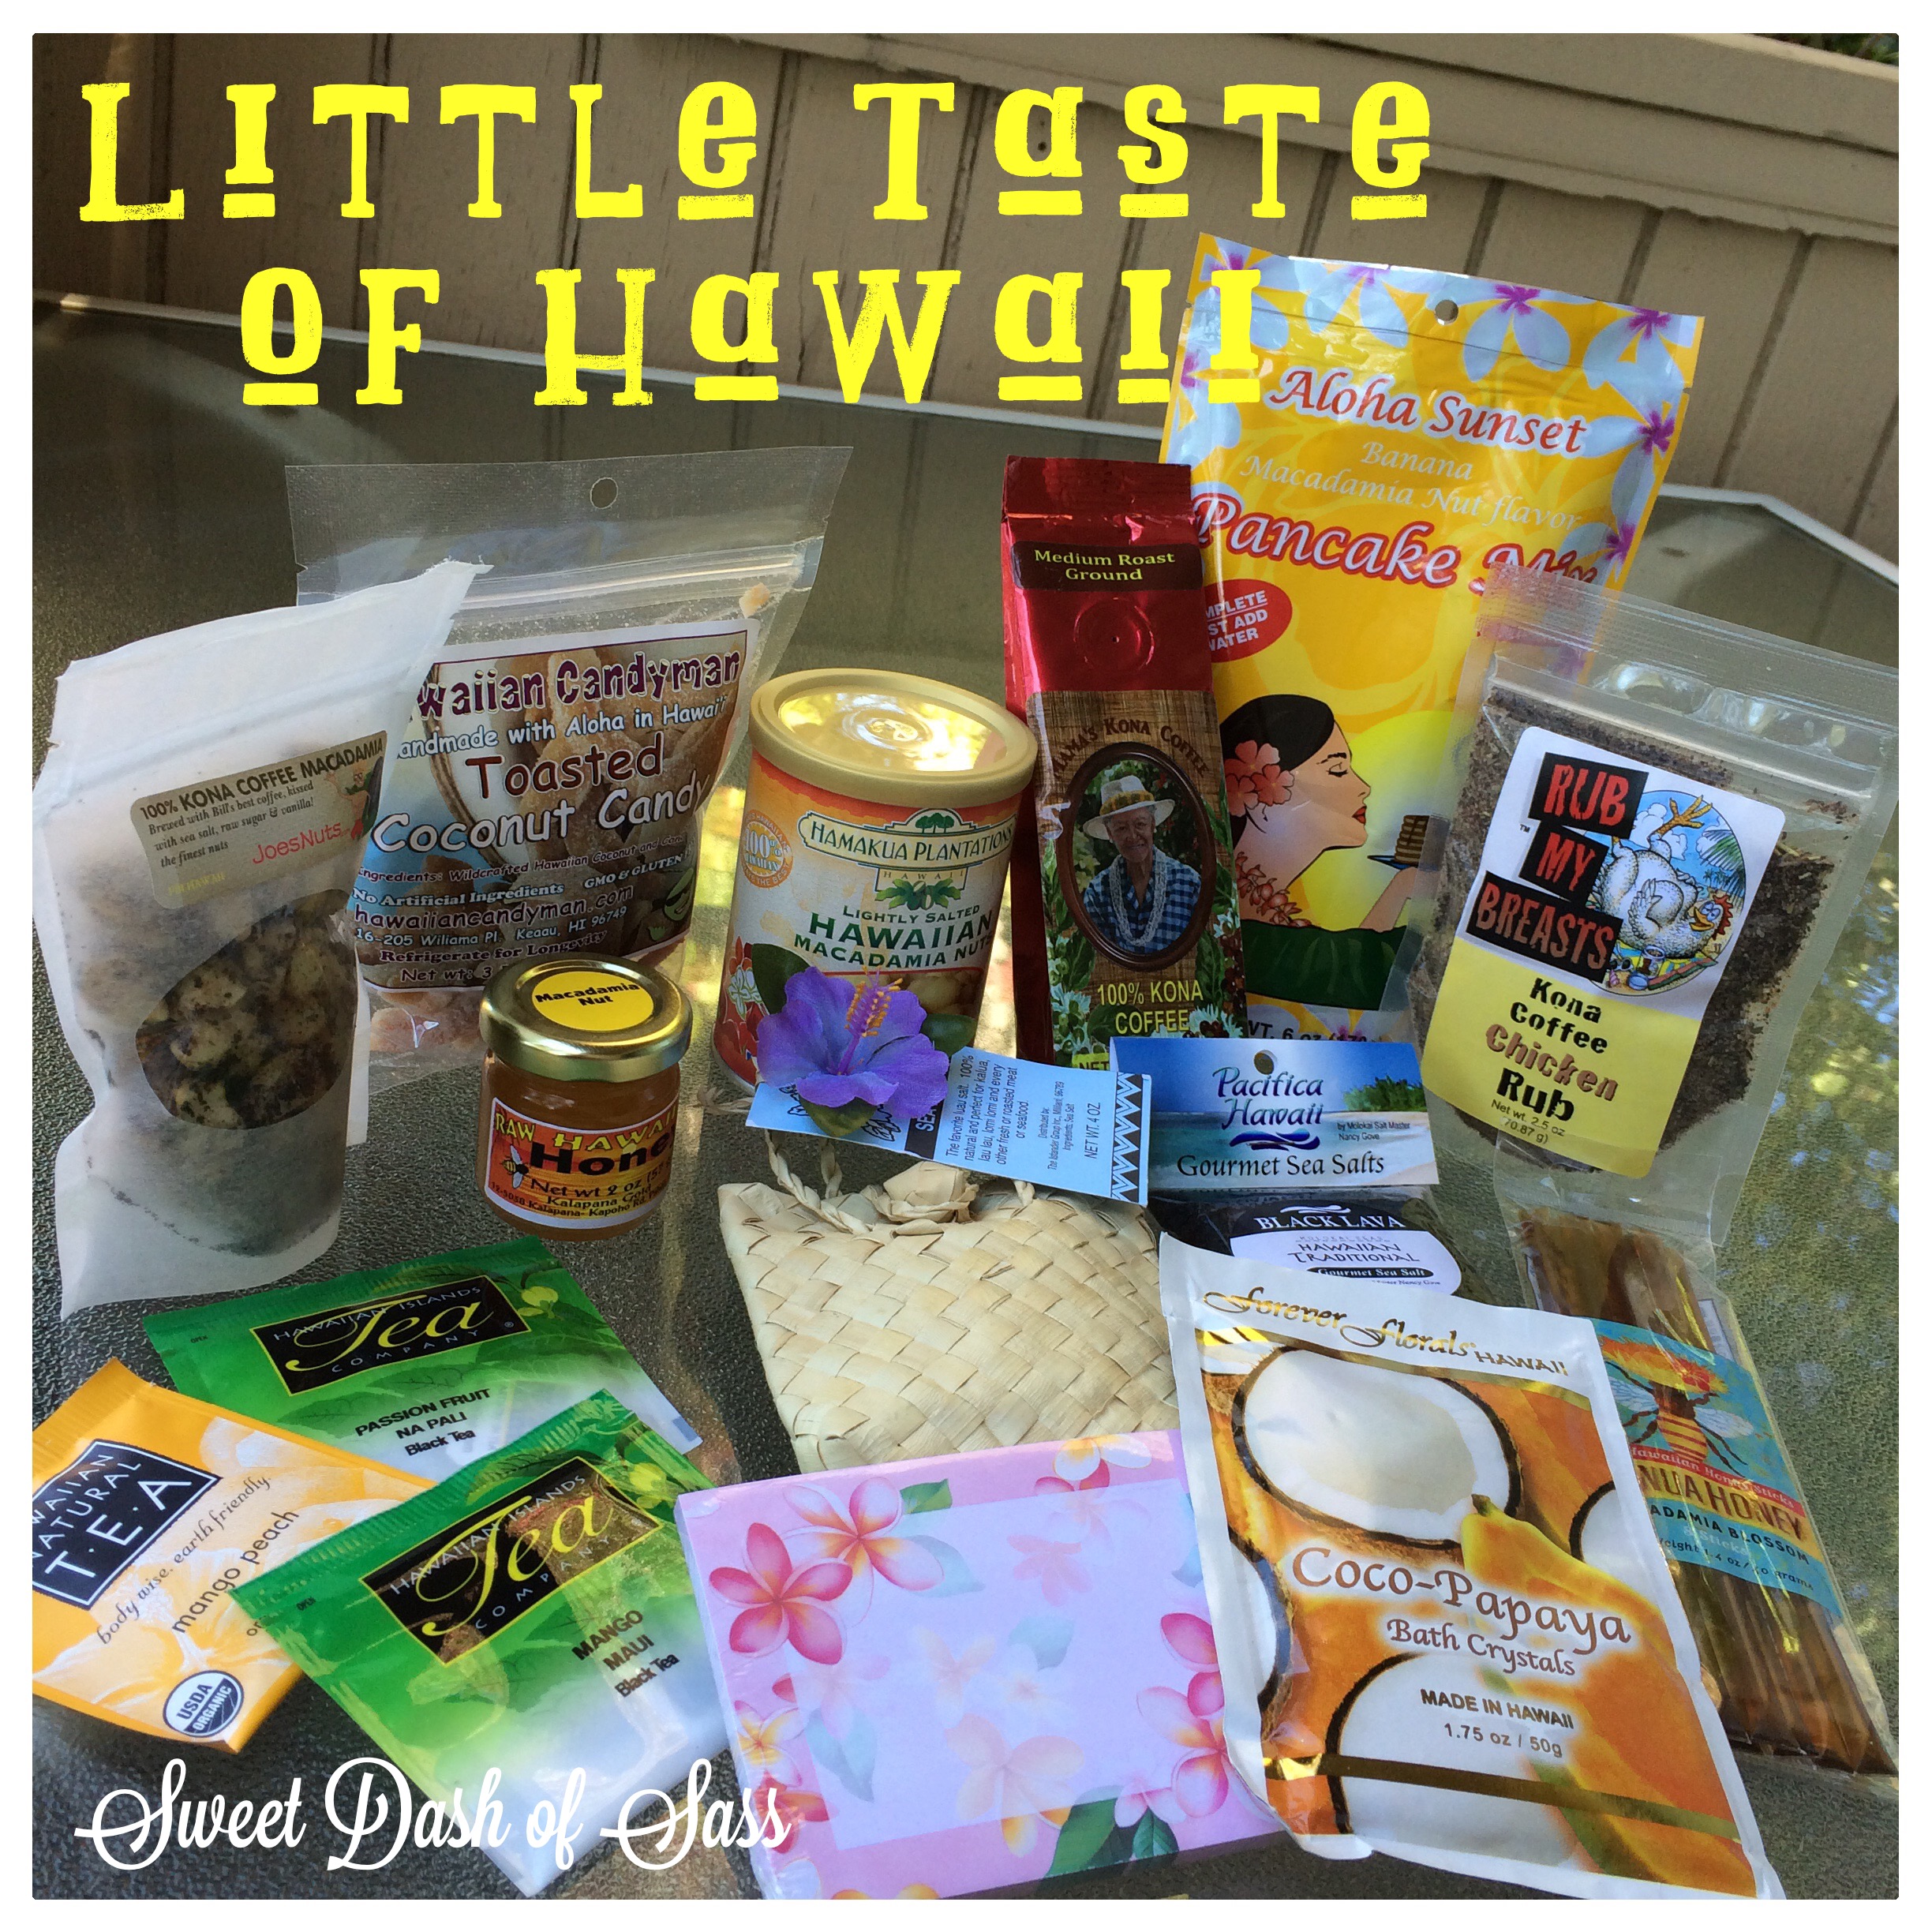 Little Taste of Hawaii Giveaway - Check out Sweet Dash of Sass on Facebook for Details  www.SweetDashofSass.com